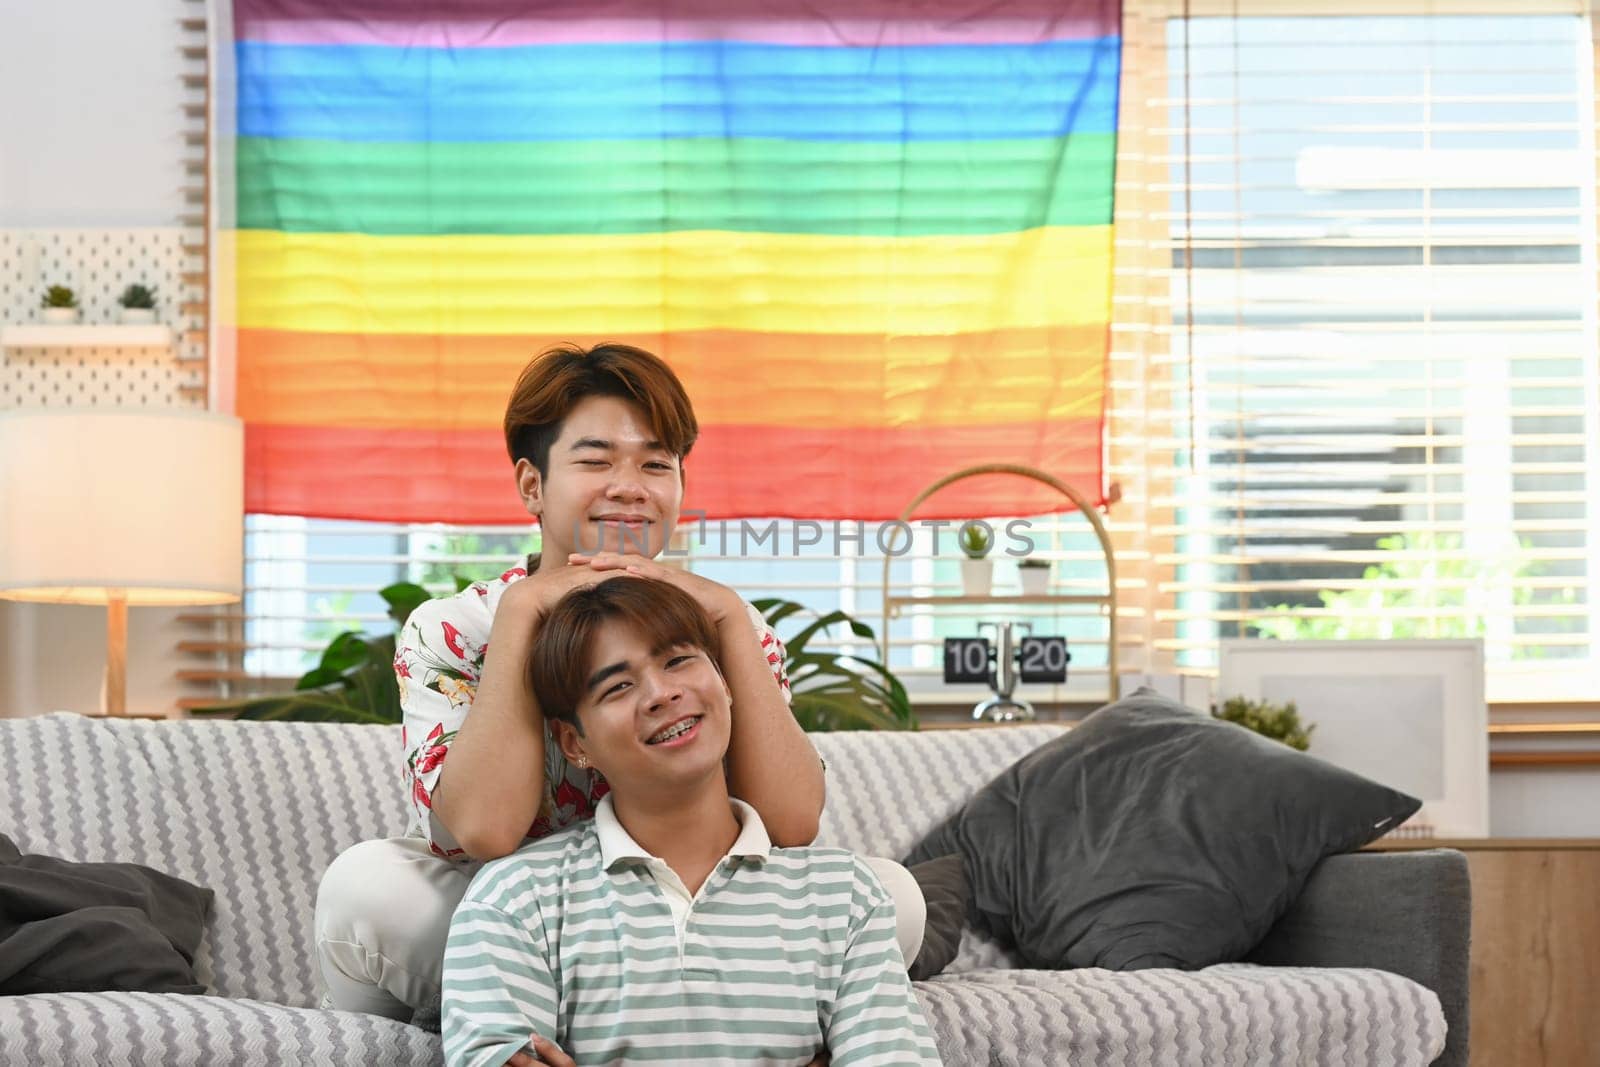 Romantic young gay couple resting together on the sofa at home. LGBTQ people lifestyle concept.